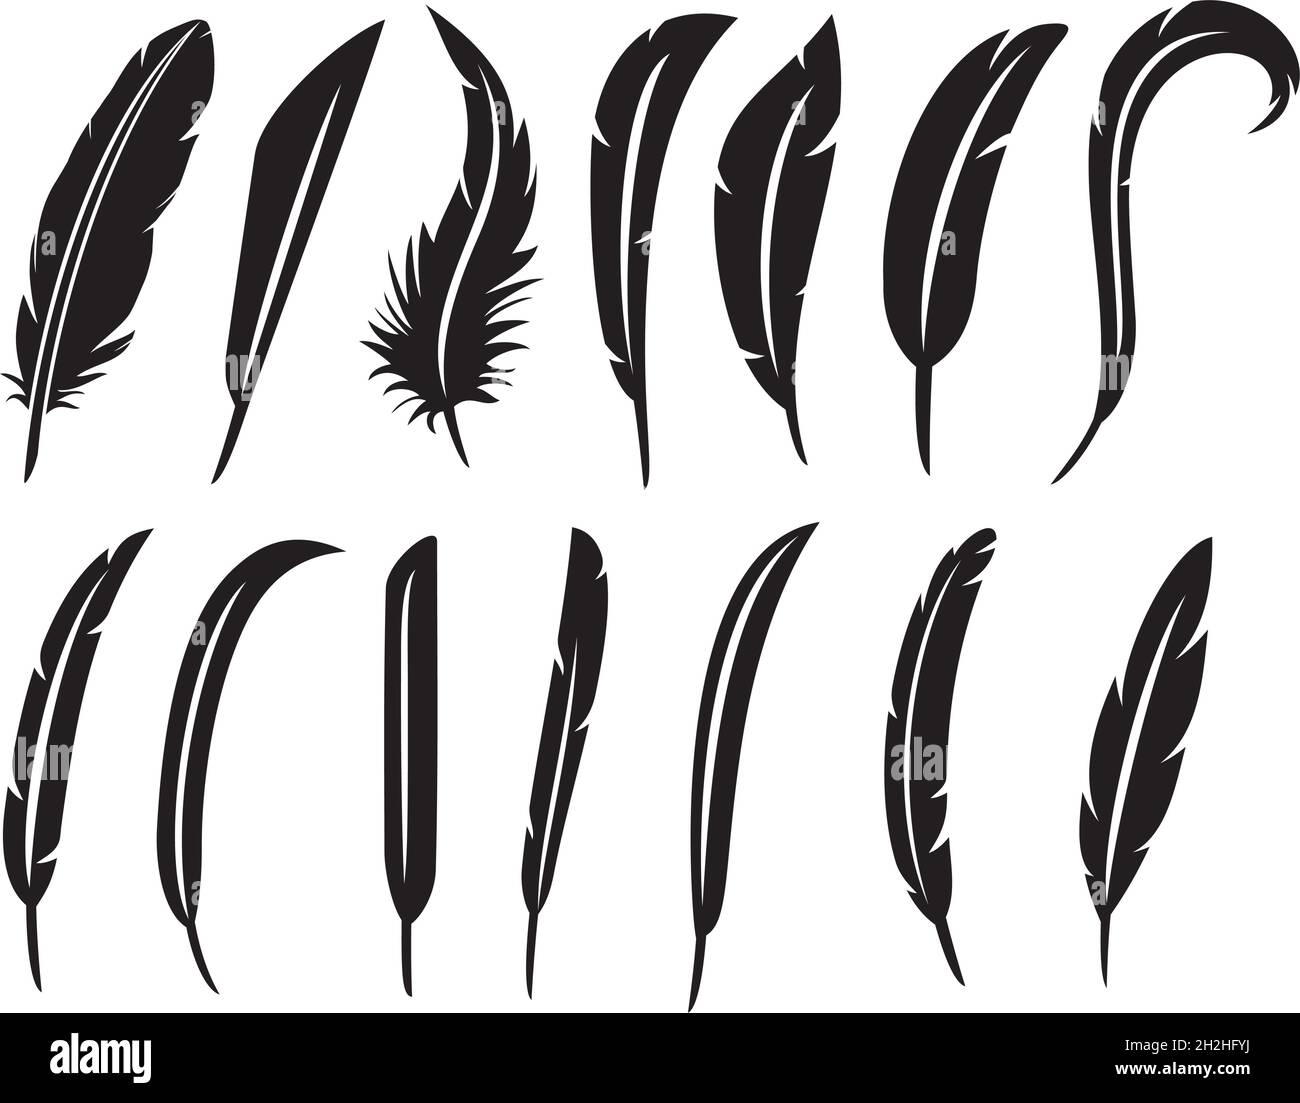 The collection of feathers vector illustration Stock Vector